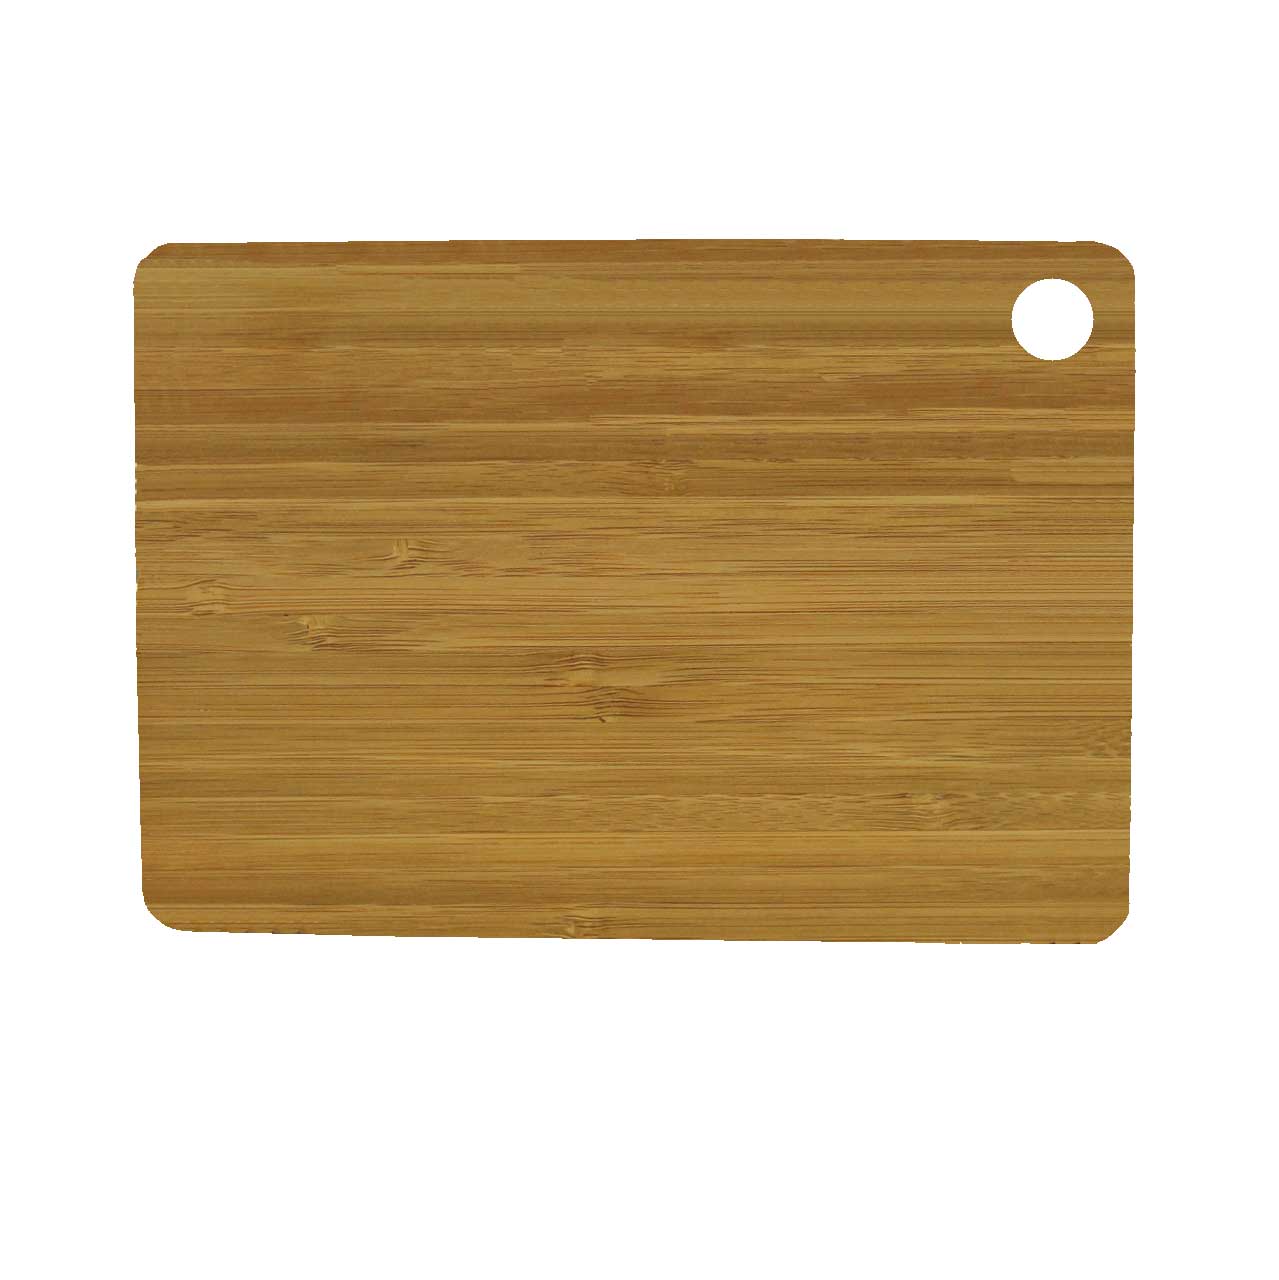 Small Bamboo Cutting Board with Hole Handle